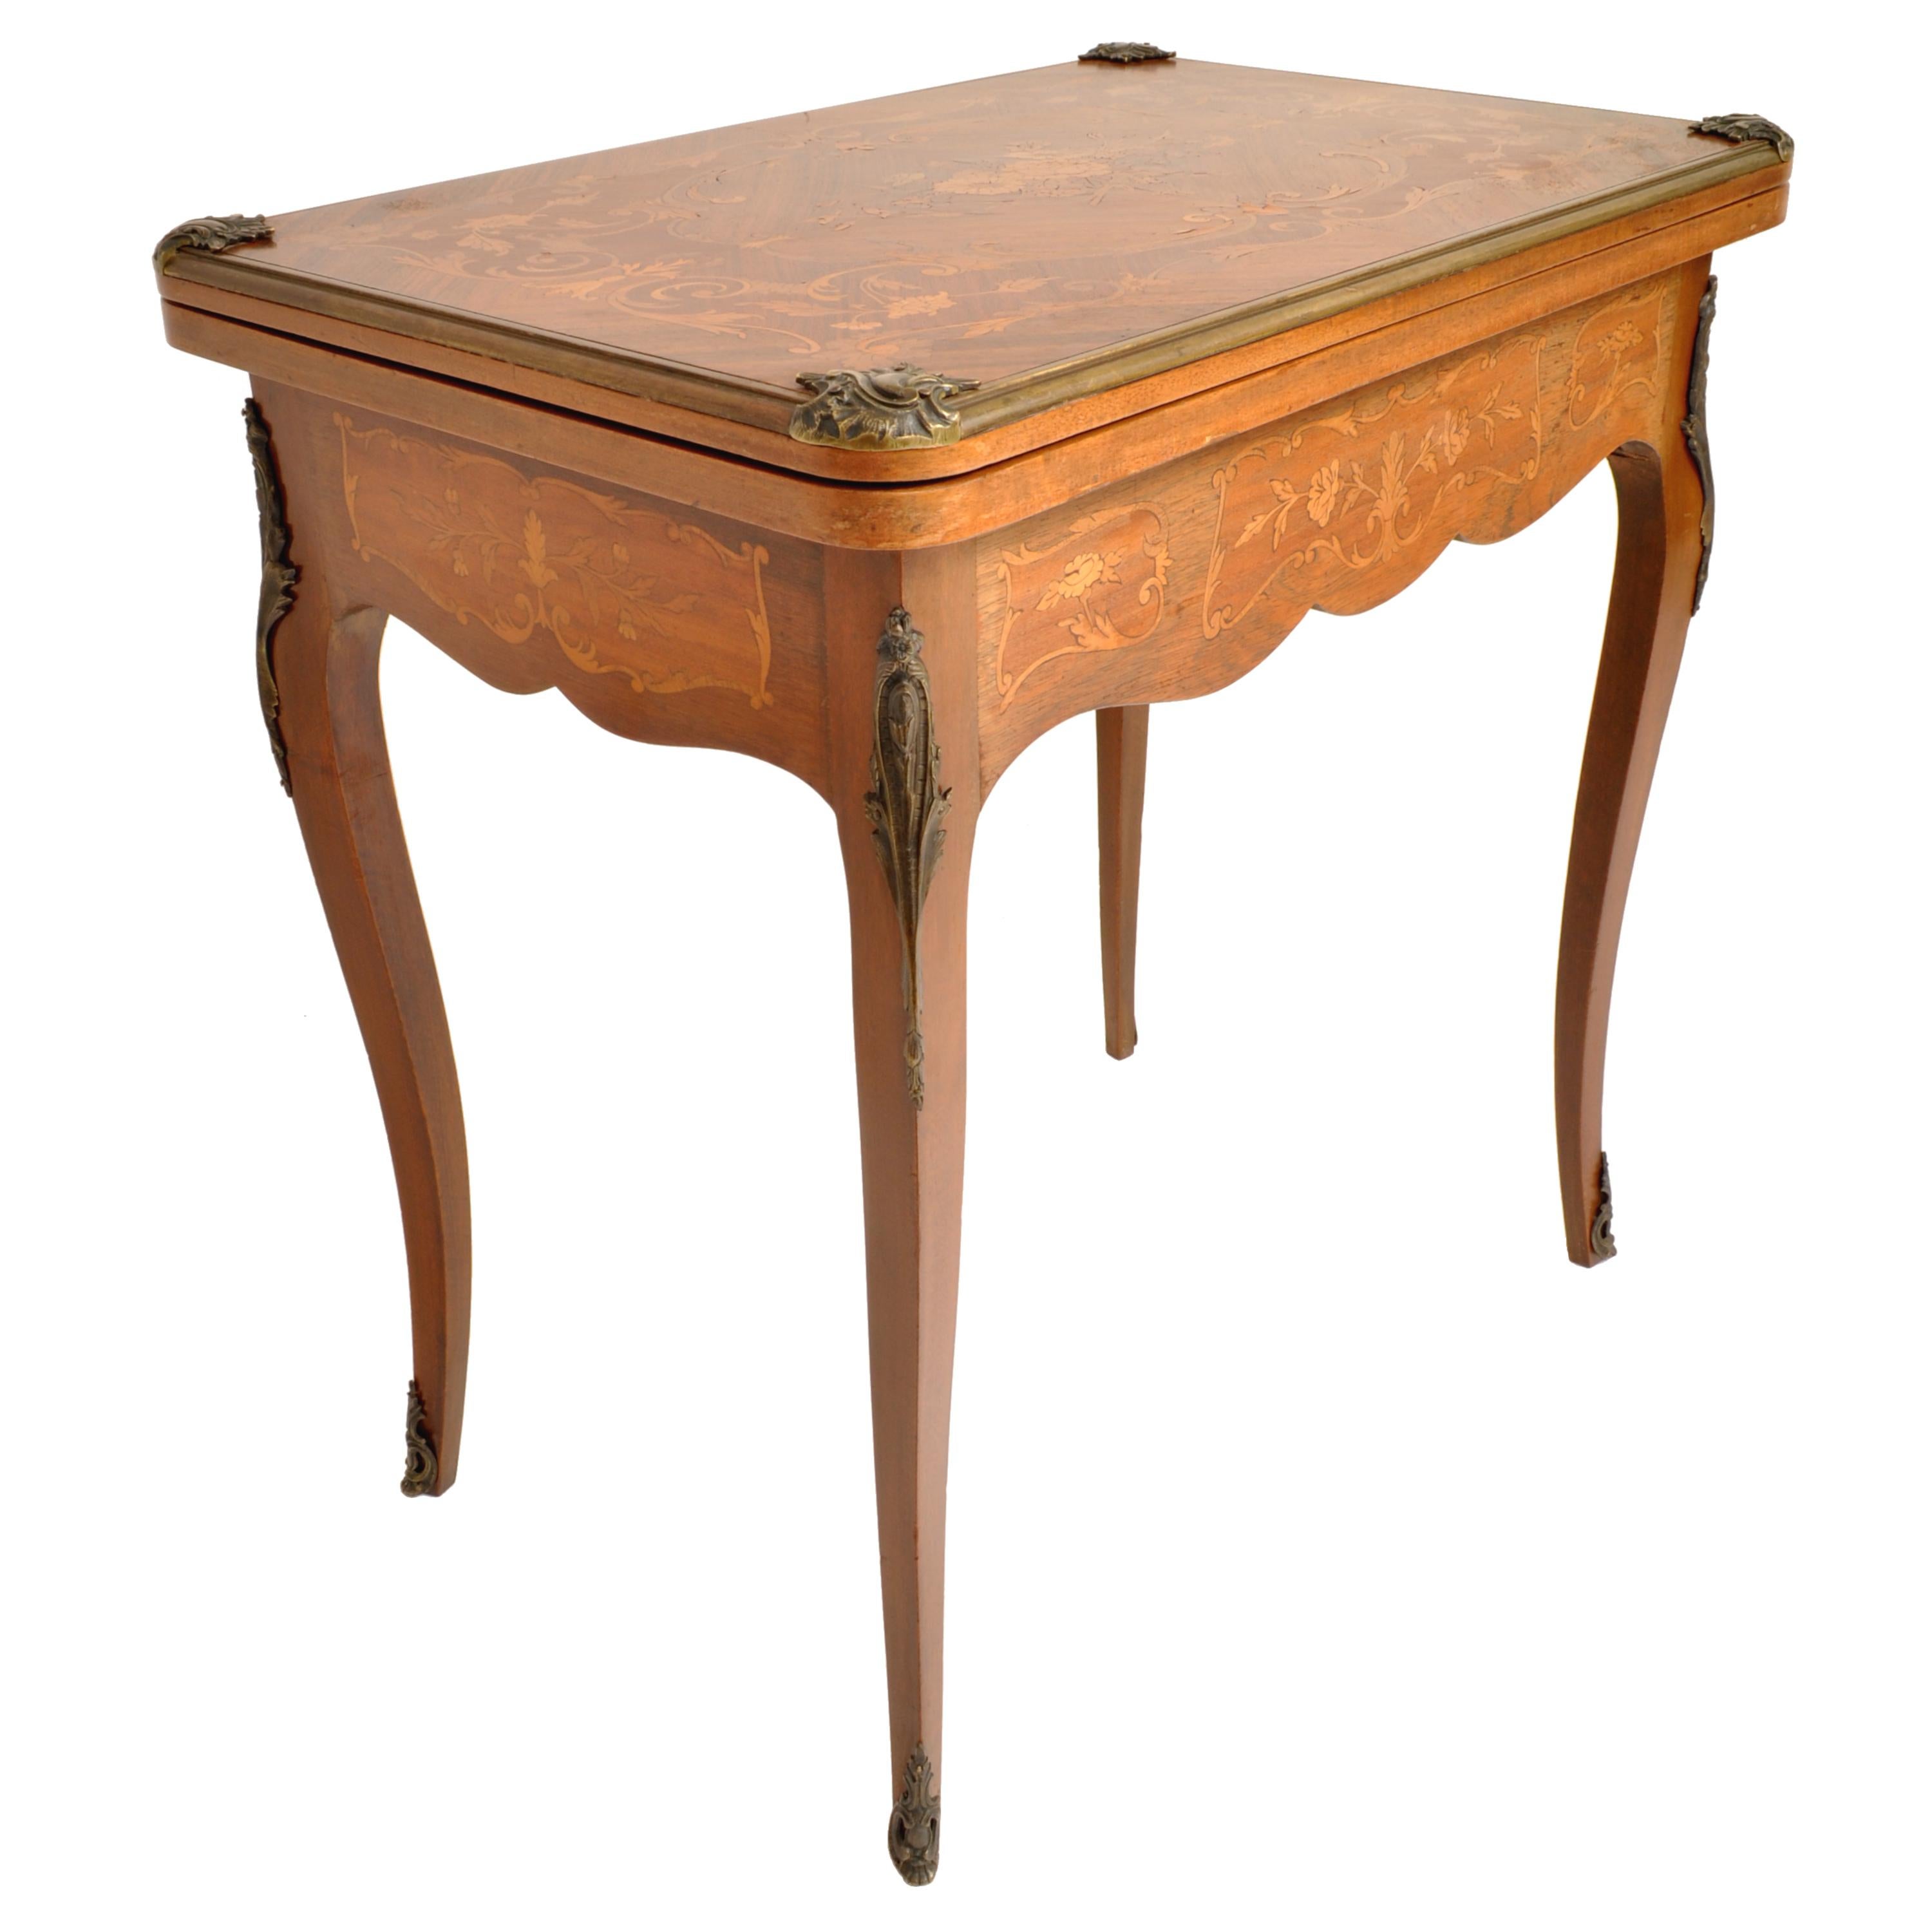 A fine & elegant antique French Louis XVI walnut/fruitwood inlaid card/games table, circa 1880.
The table having a feather banded walnut top, finely inlaid with a central floral panel & surrounded by inlaid foliate, at each corner there is a